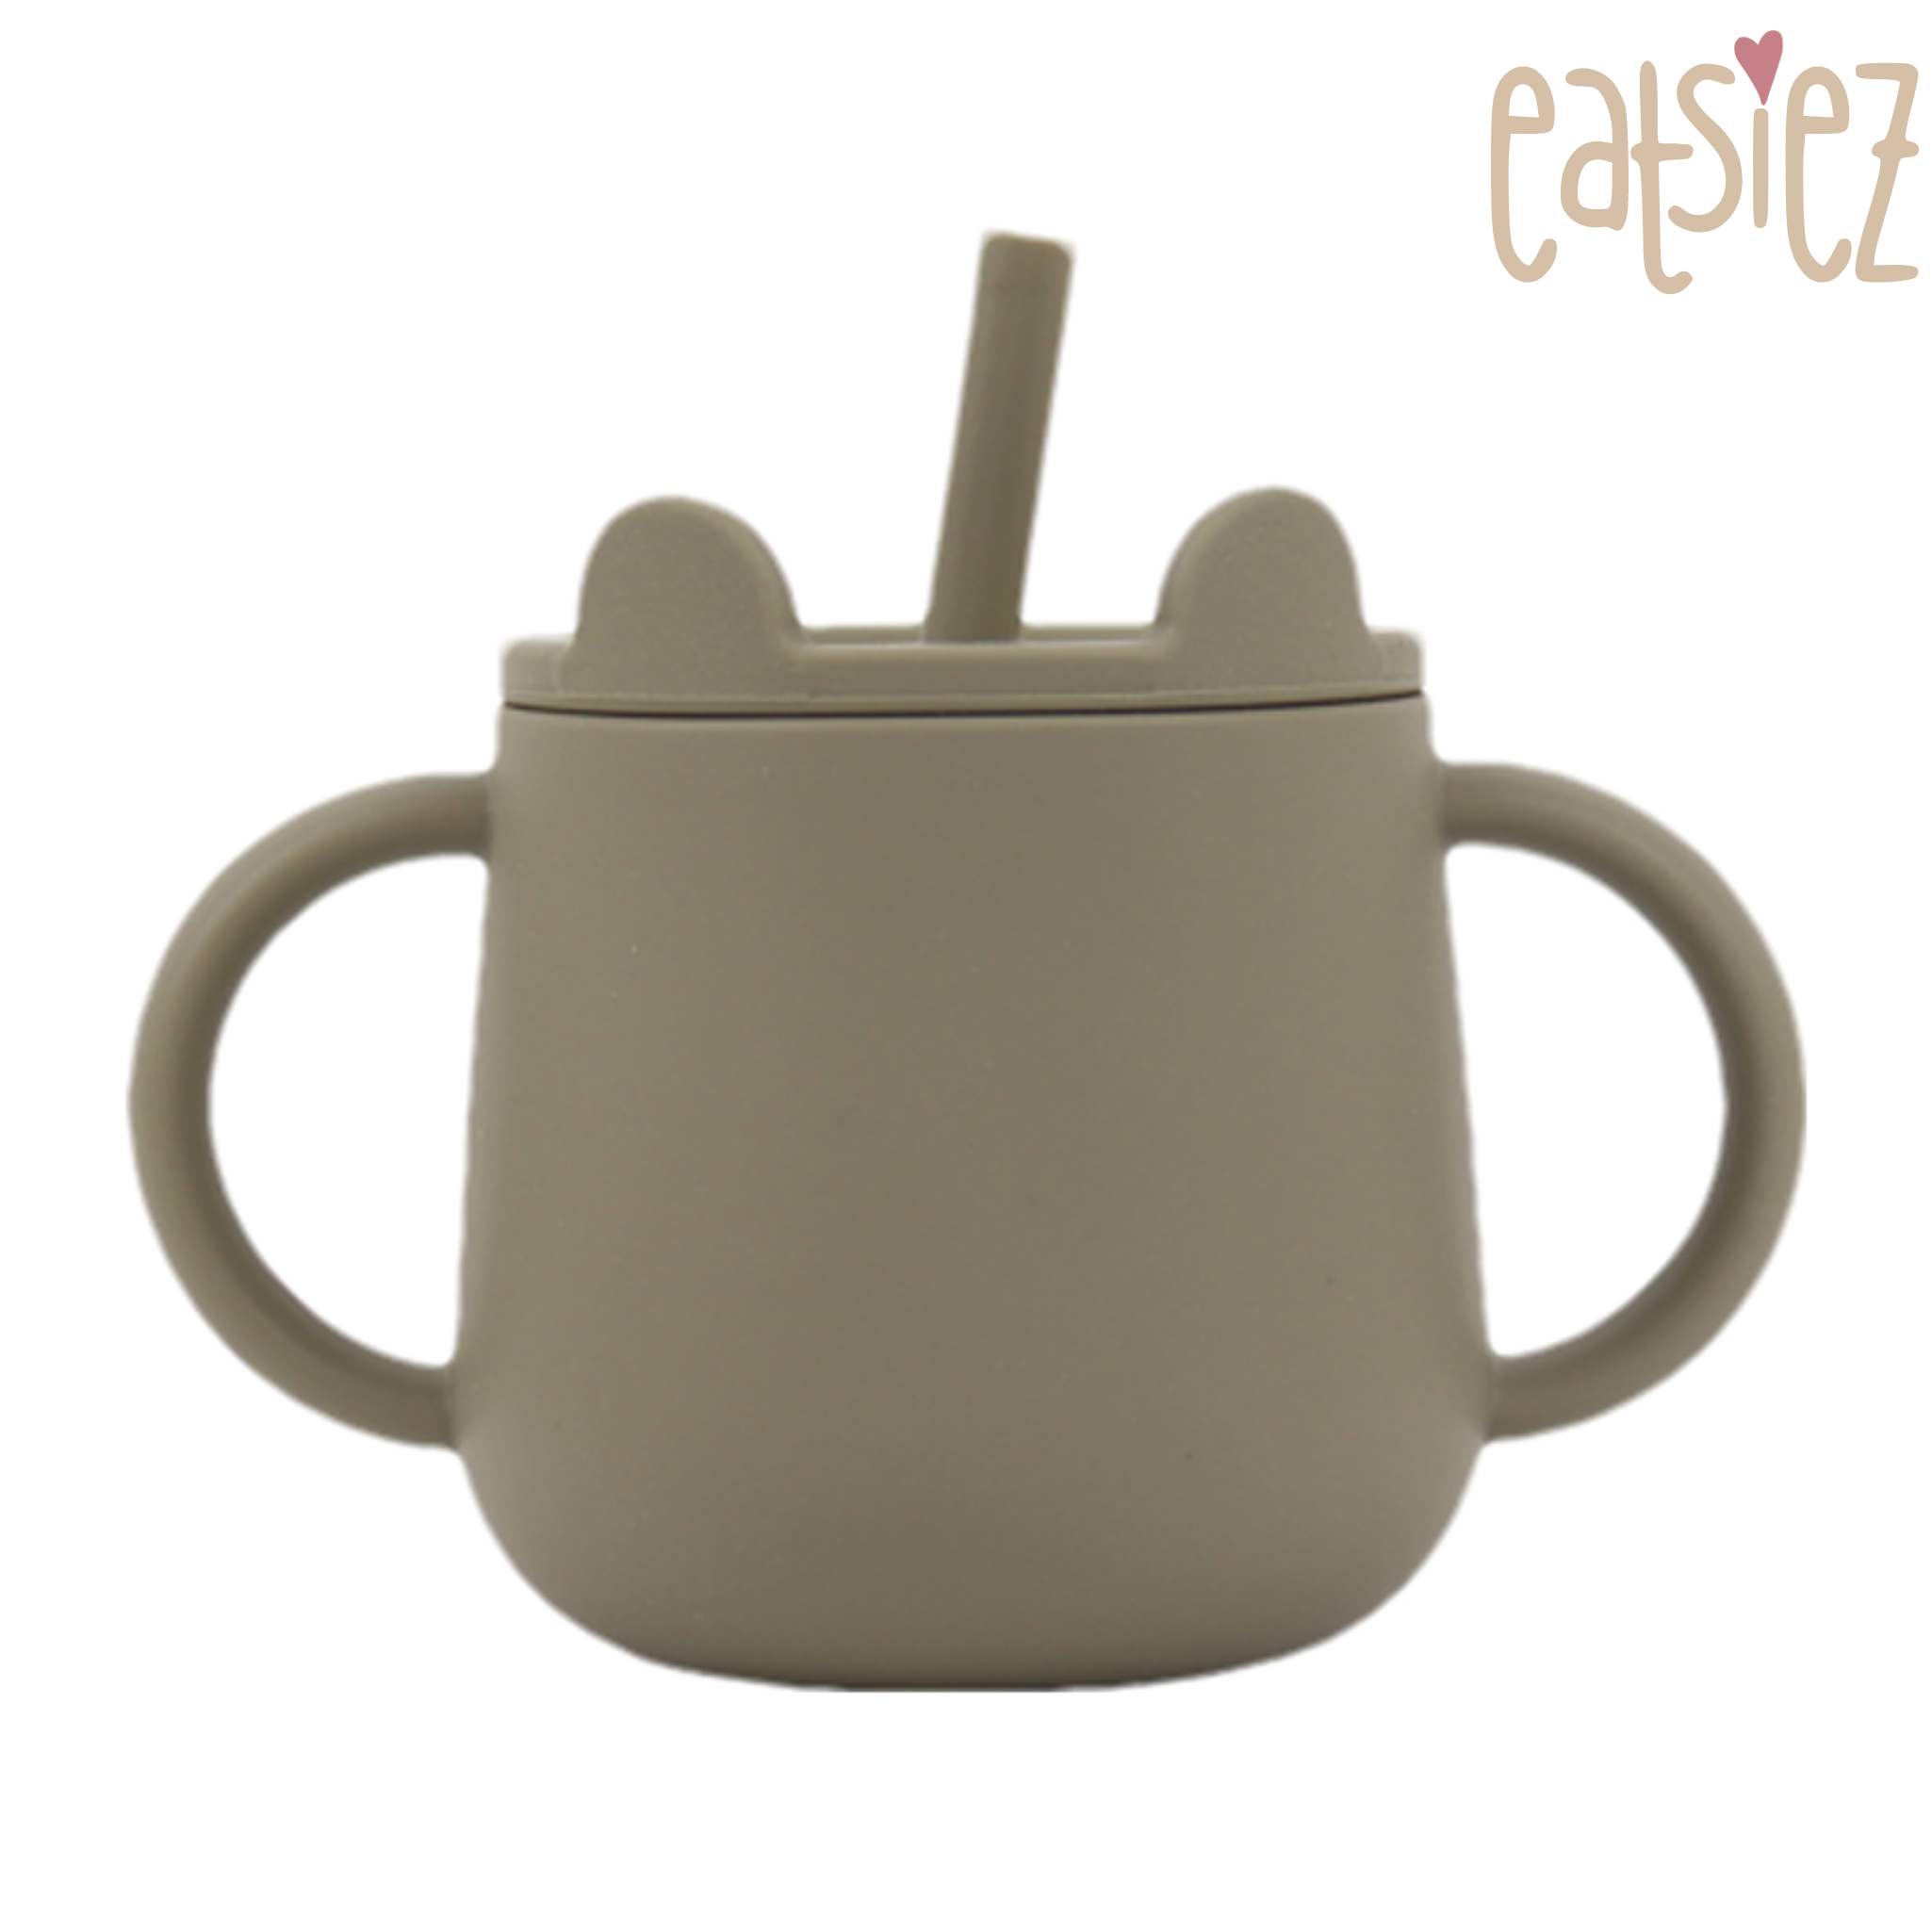 Eatsiez Cup with Lid & Straw